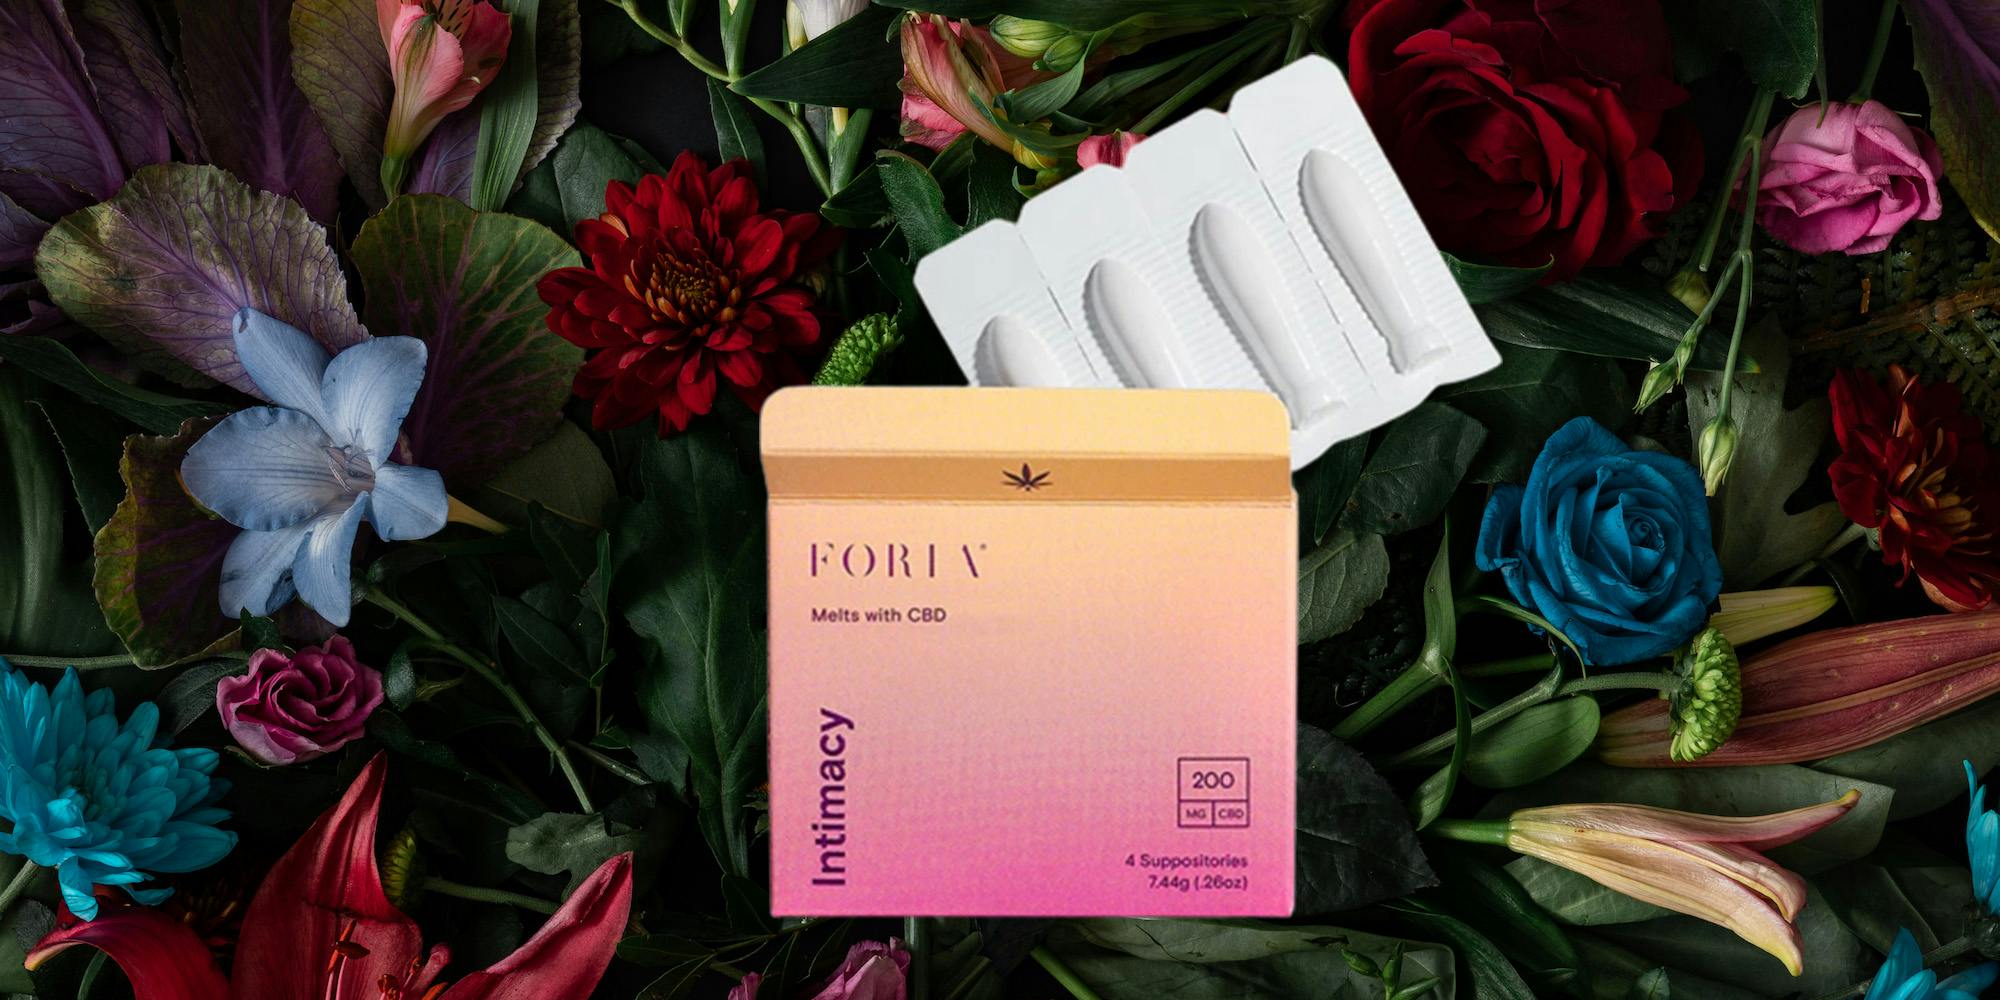 Foria Melts open up a new world of pleasure and relief